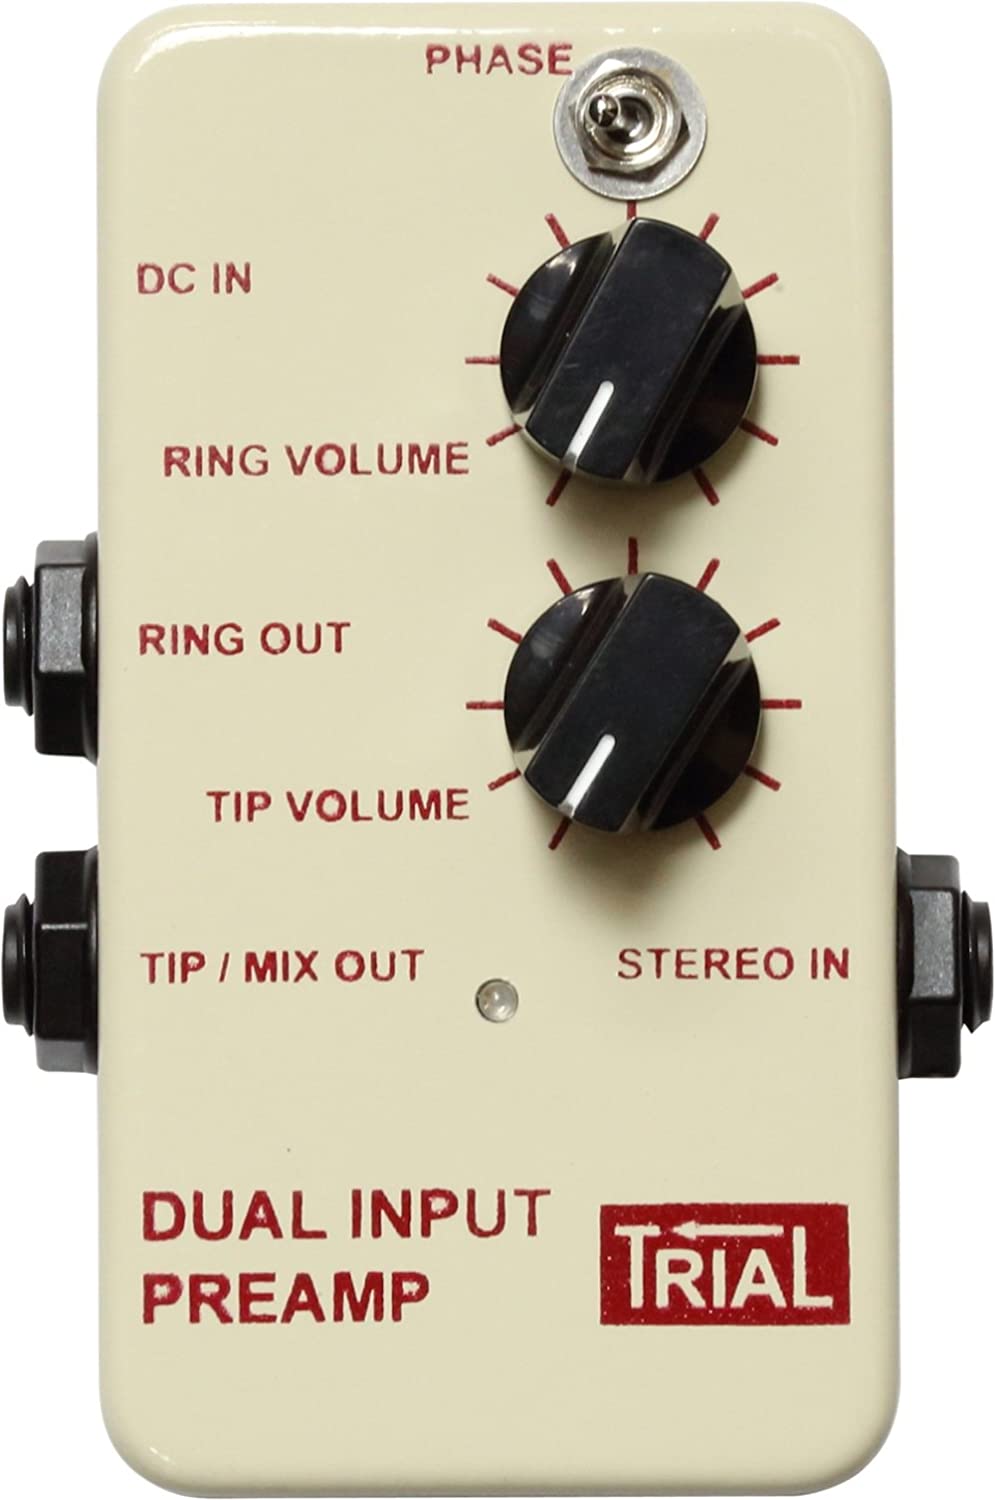 Trial / Preamp / DUAL INPUT PREAMP - Discovery Japan Mall